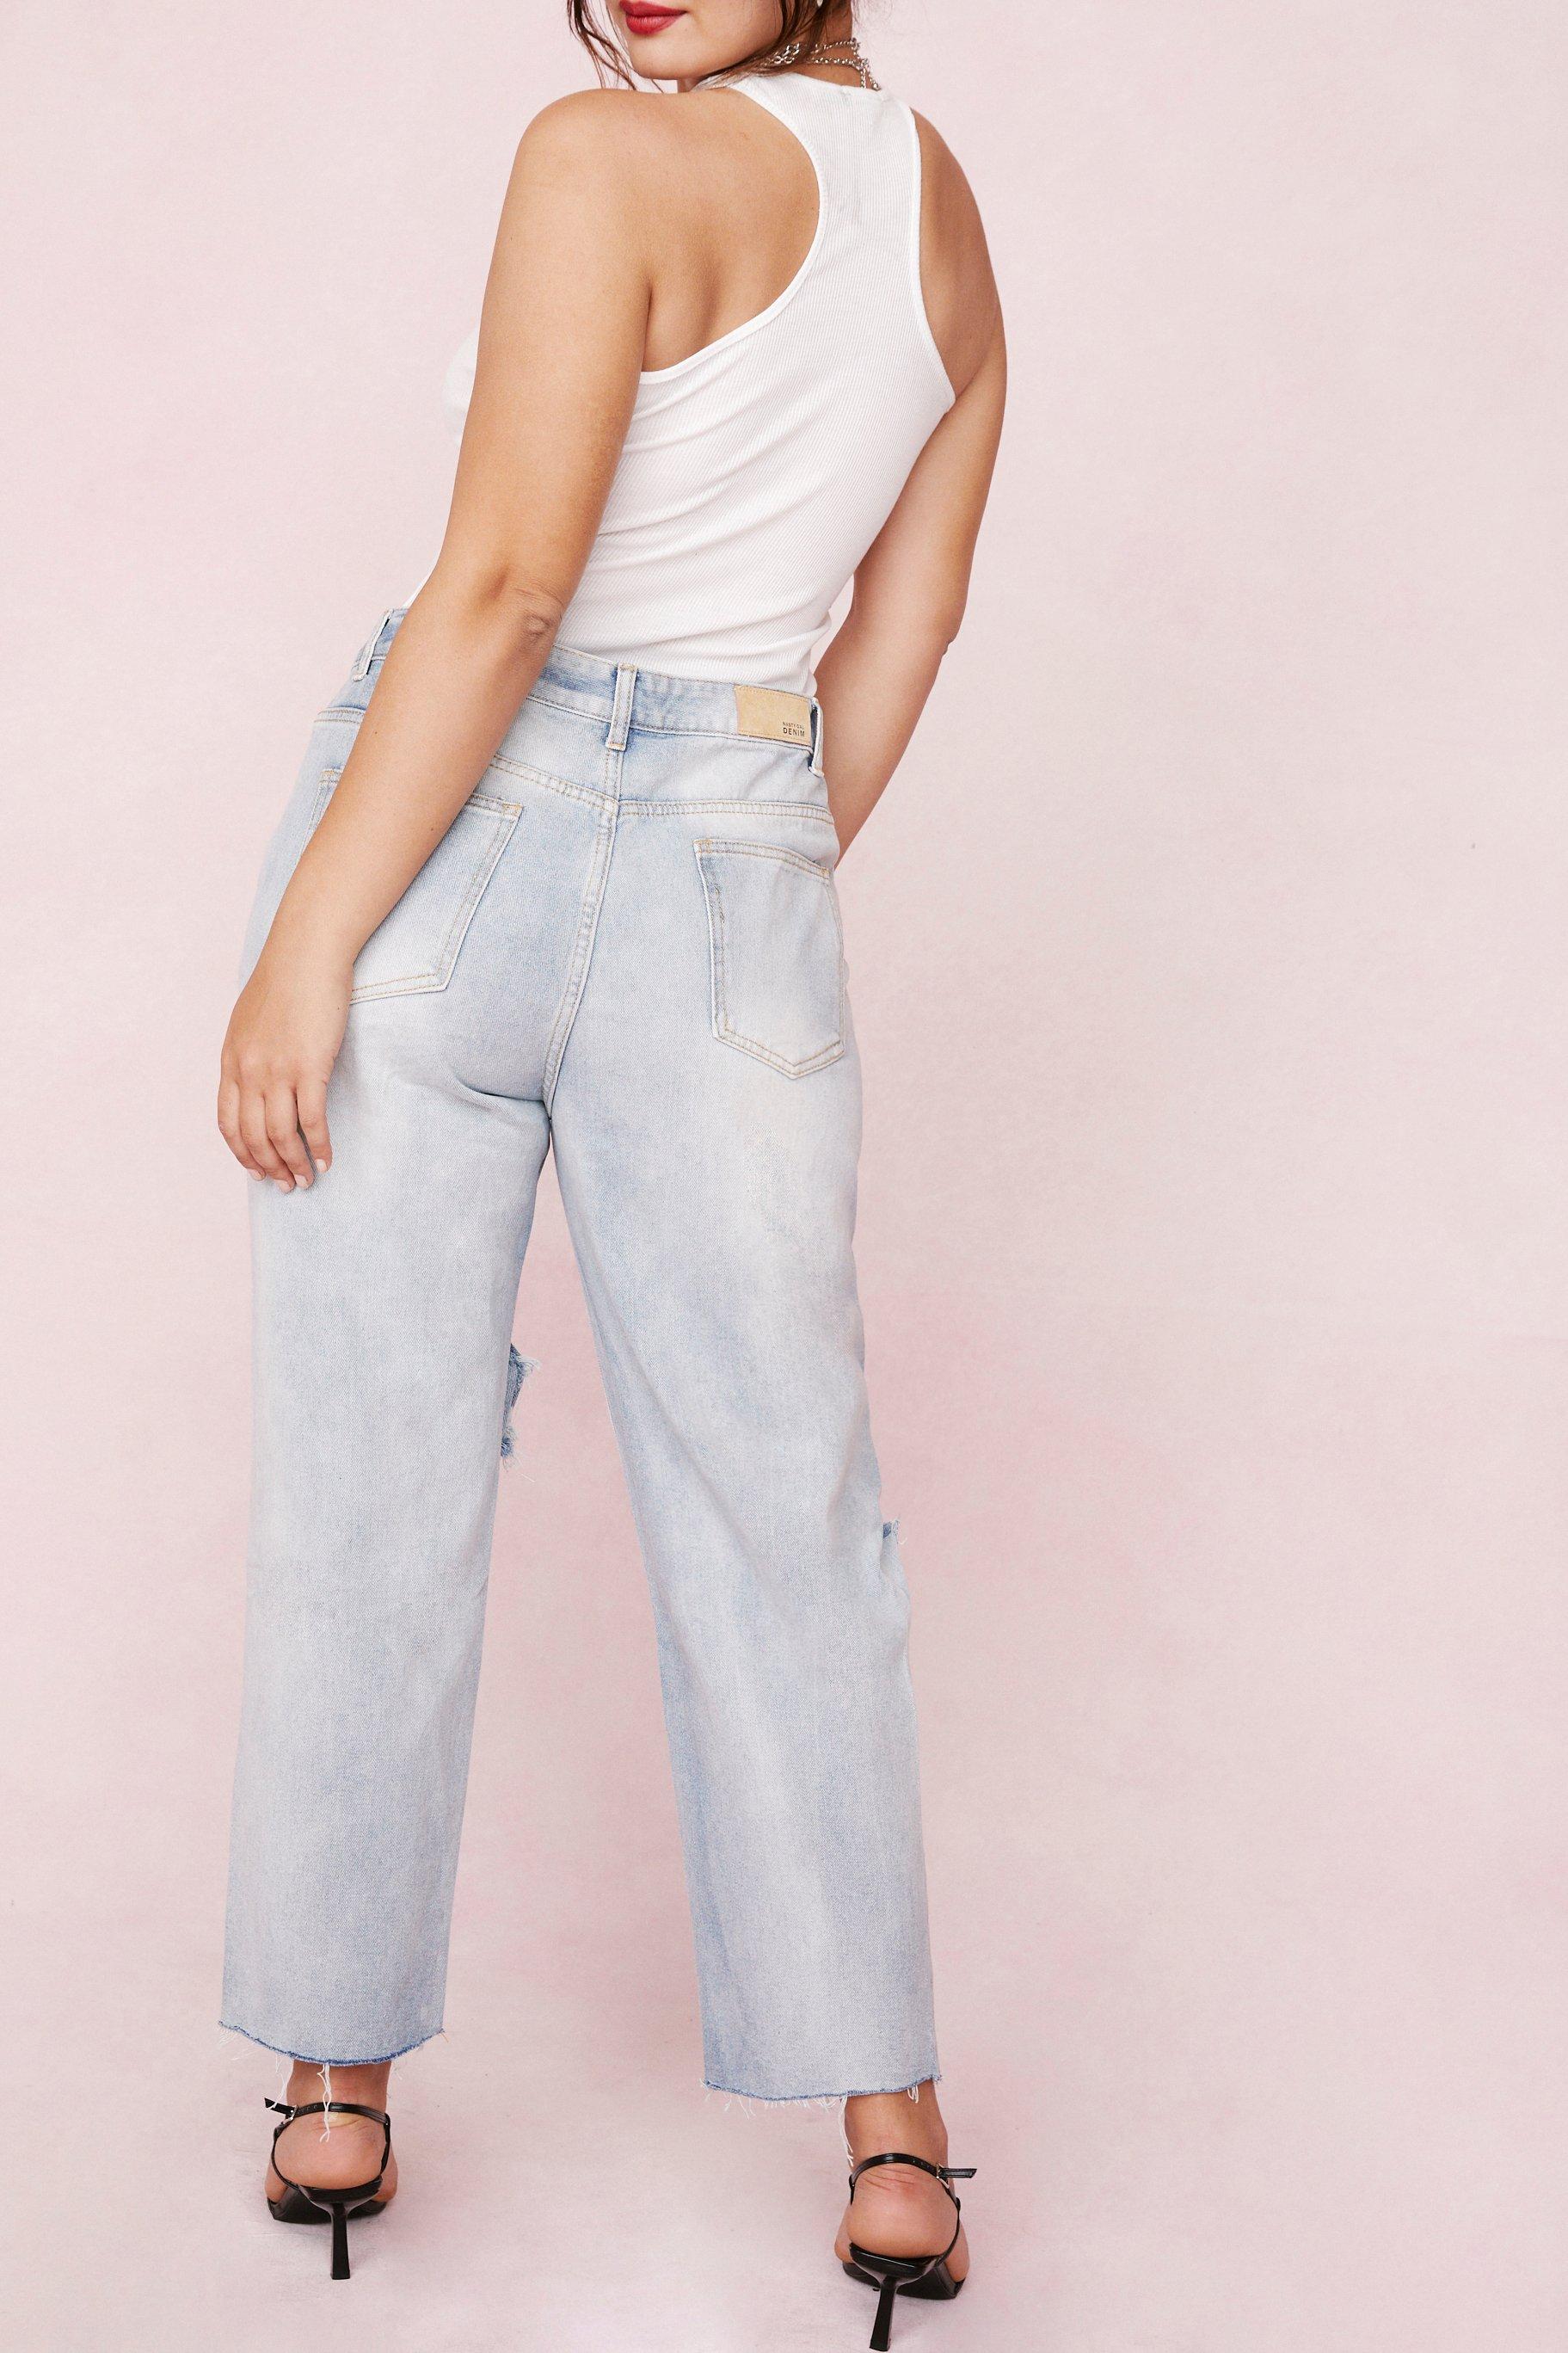 Plus Size Ripped High Waisted Jeans